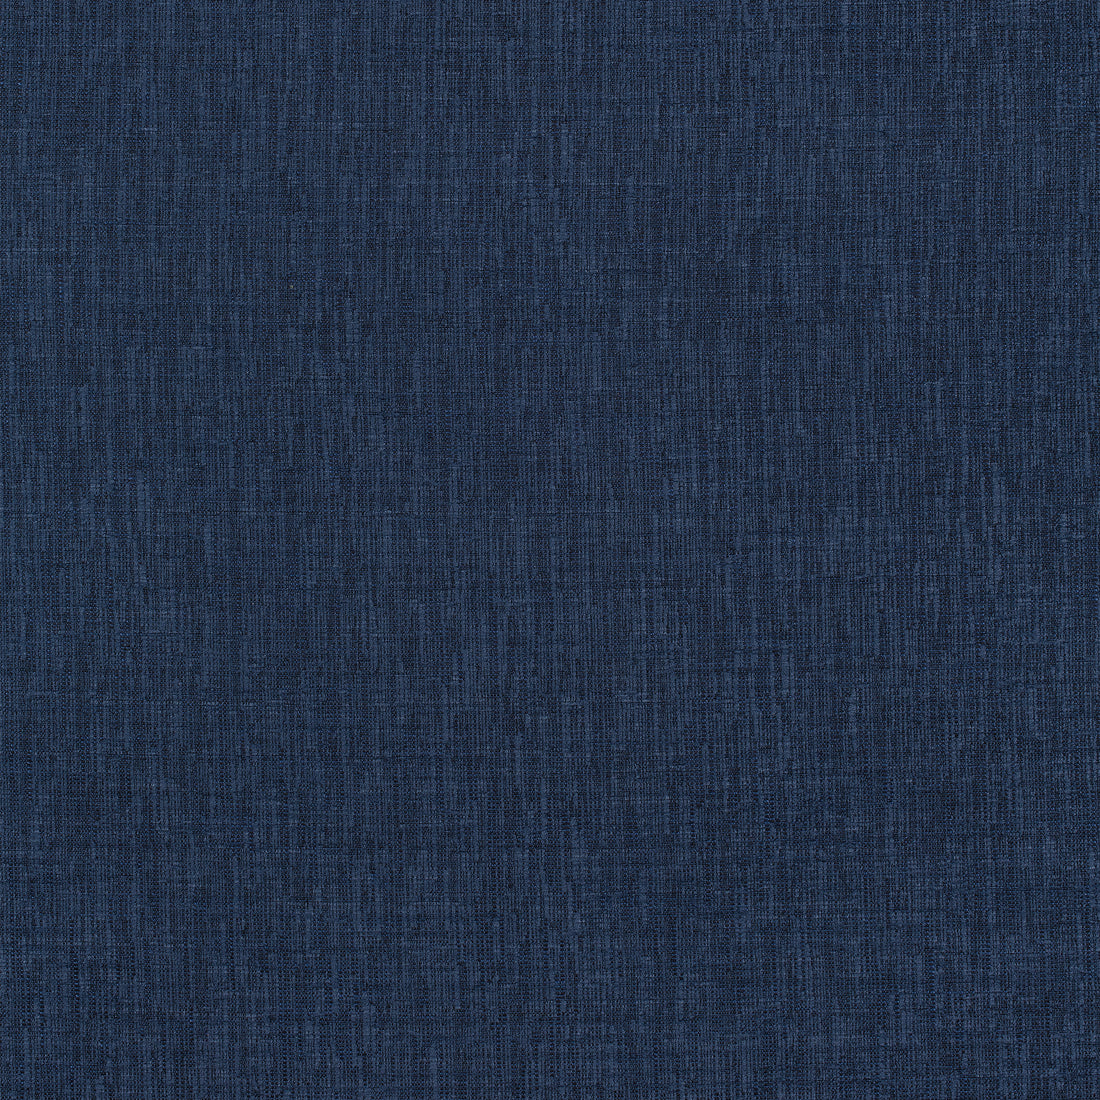 Montage fabric in navy color - pattern number W80480 - by Thibaut in the Mosaic collection